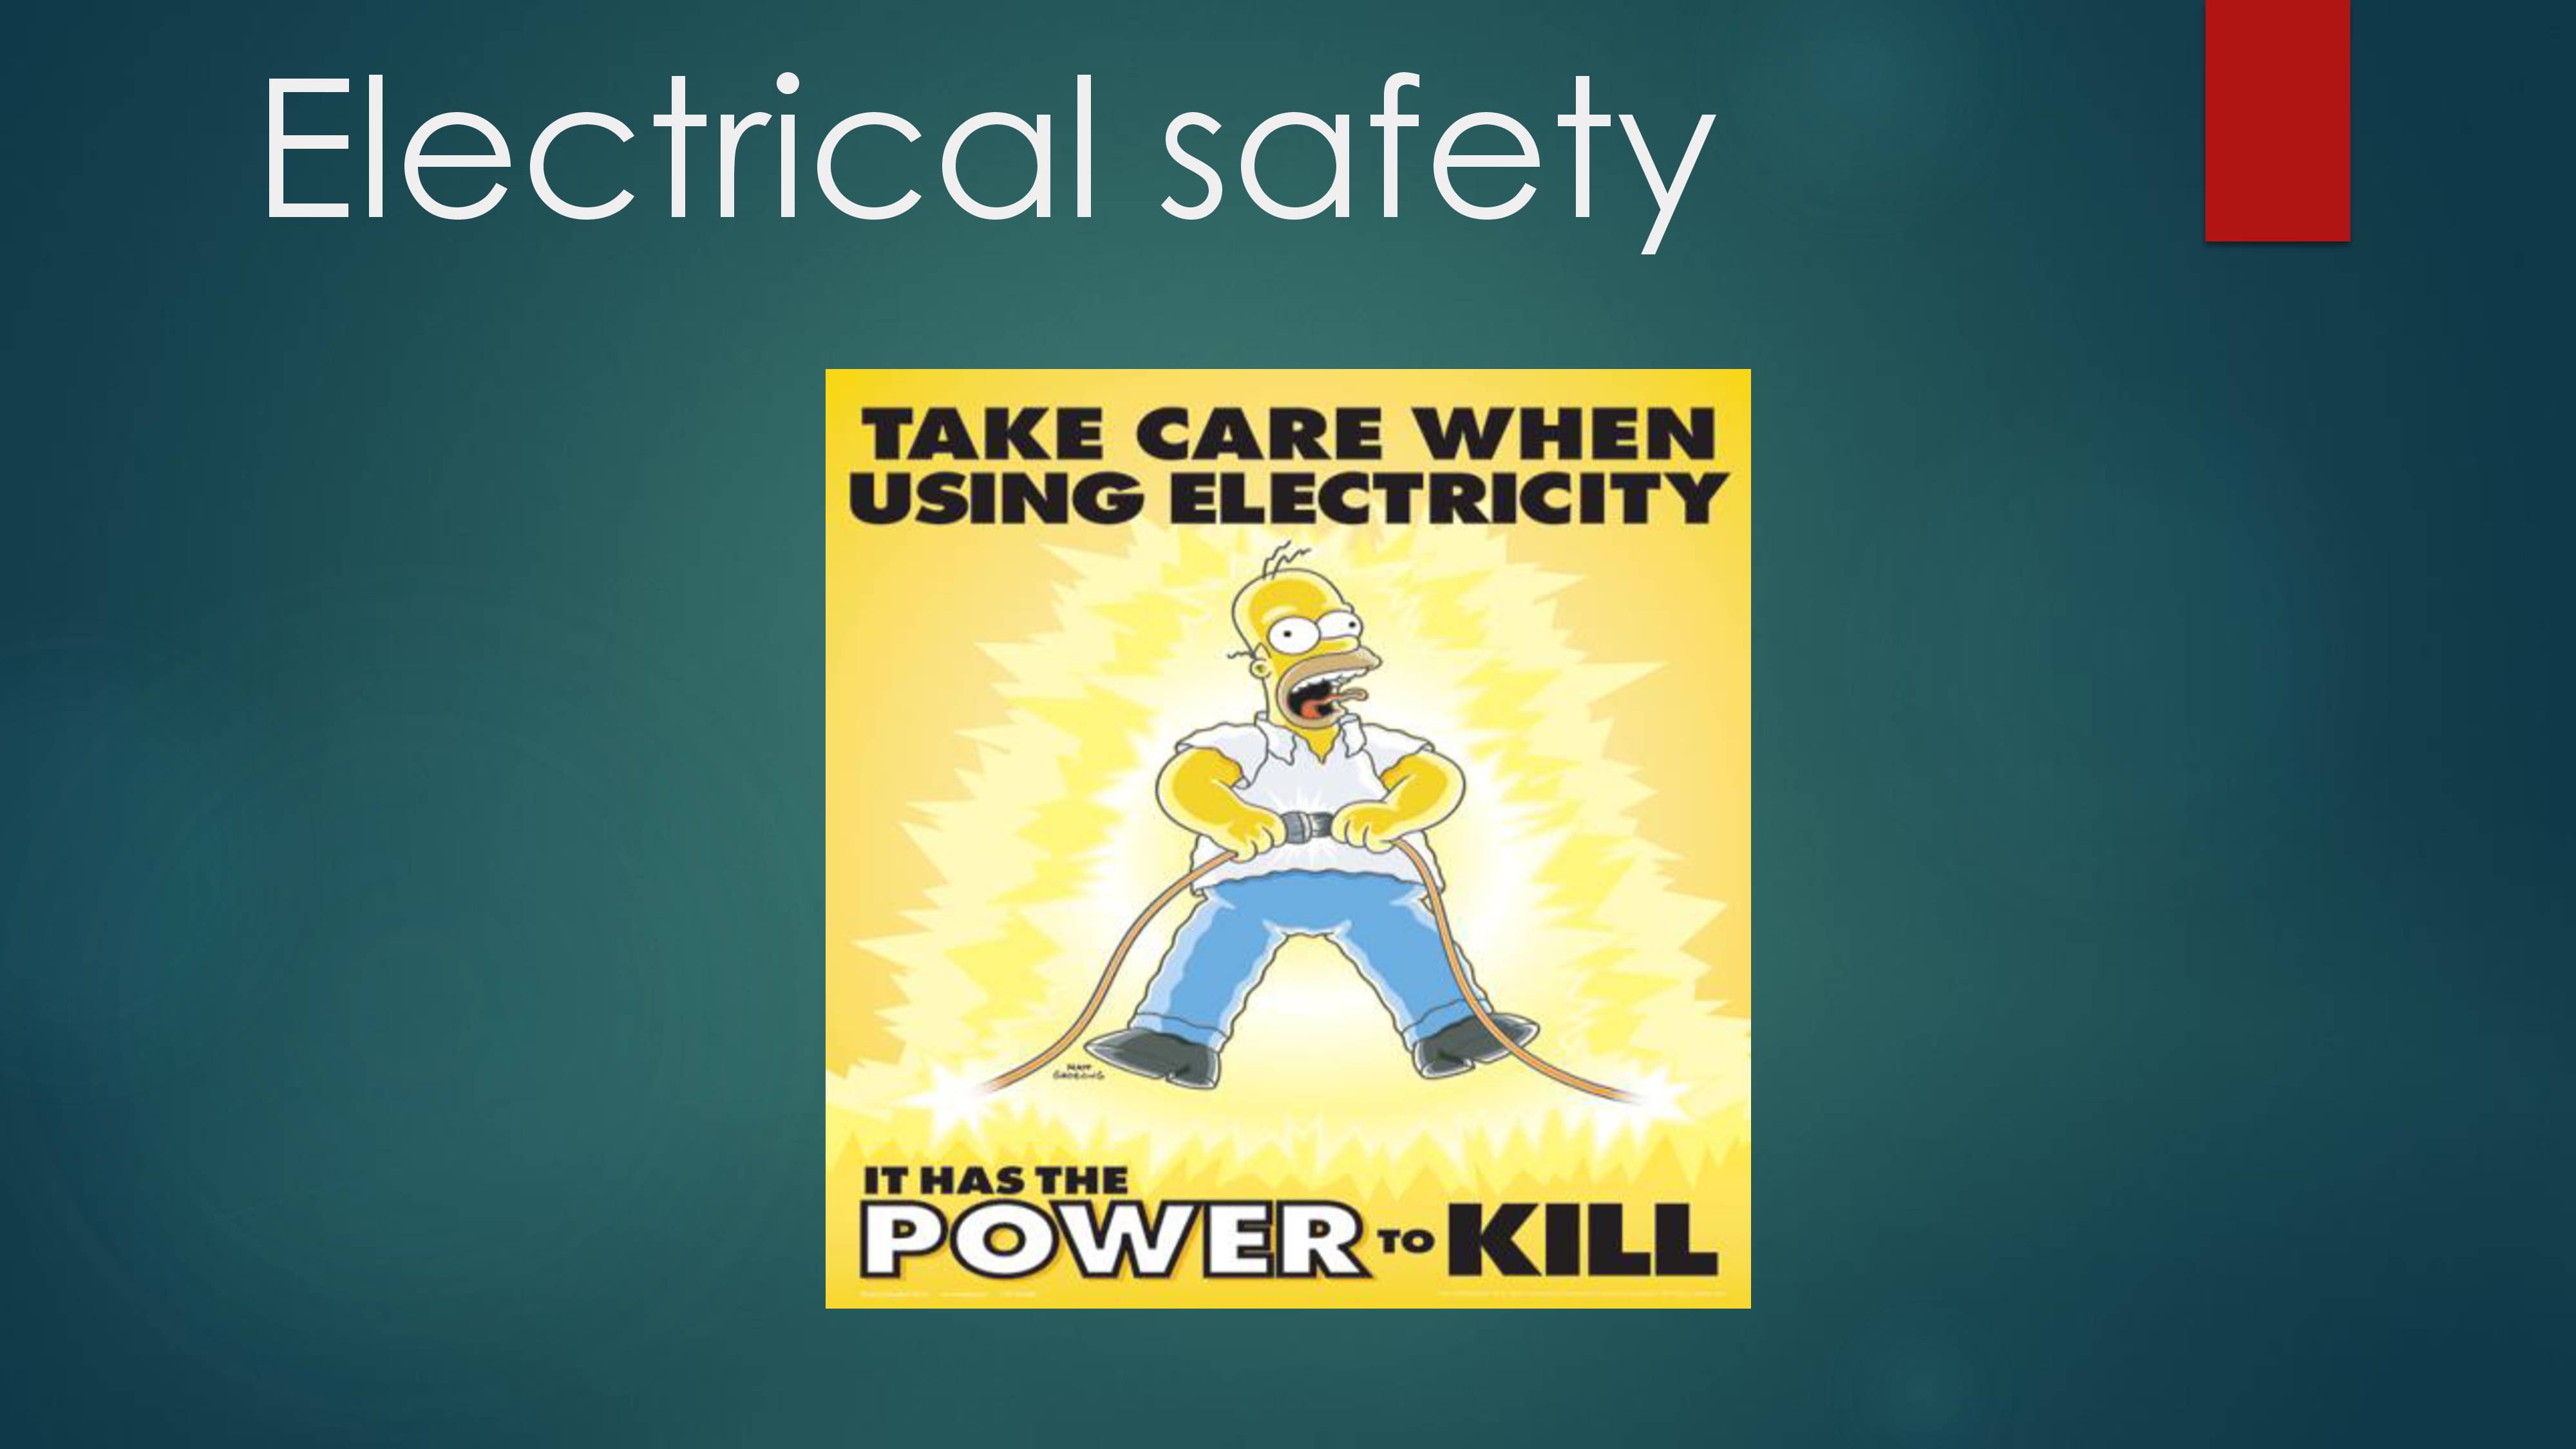 Notes on Electrical Safety